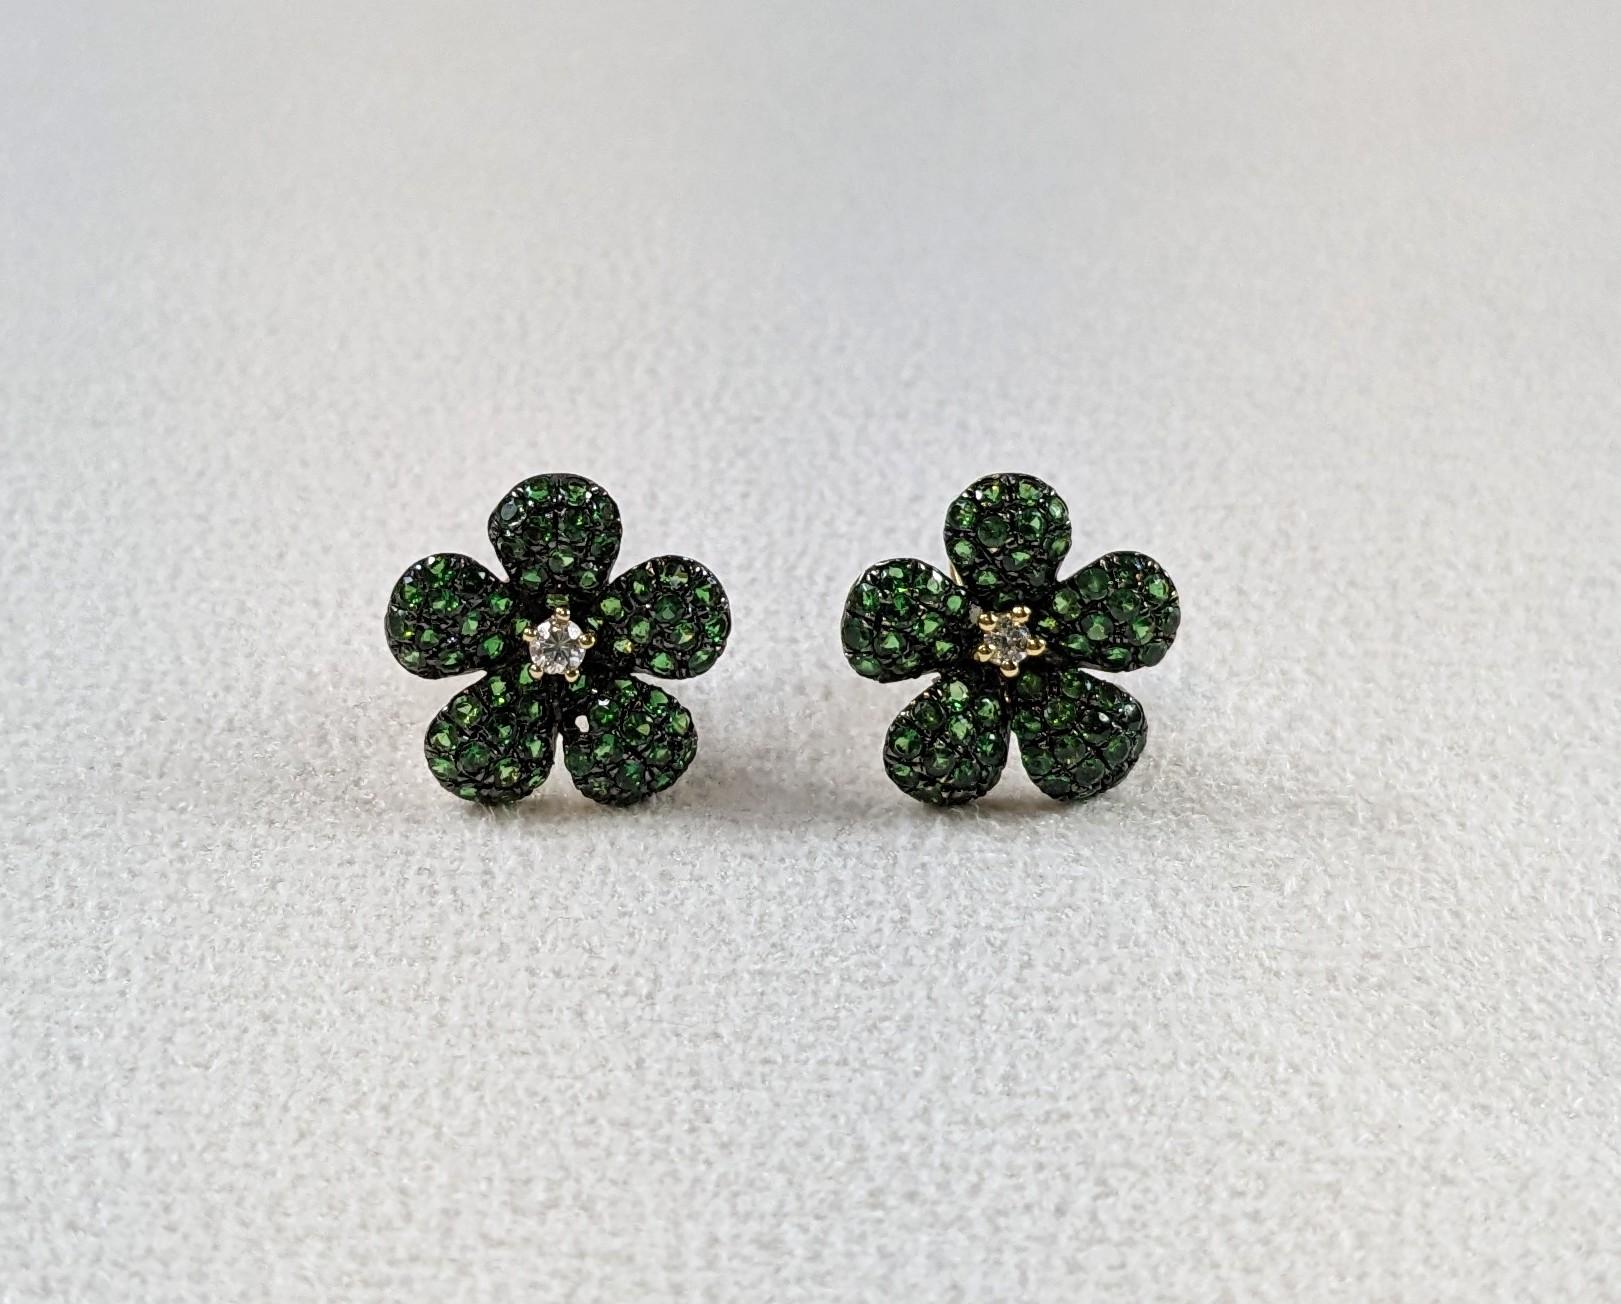 Beautiful emerald  earrings set in Pavé setting and pavé of total 0.60ct emerald on pavonated gold, with 0.10ct center diamonds 
Flower Measure 14 mm / 0.55 inches
Irama Pradera is a Young designer from Spain that searches always for the best gems